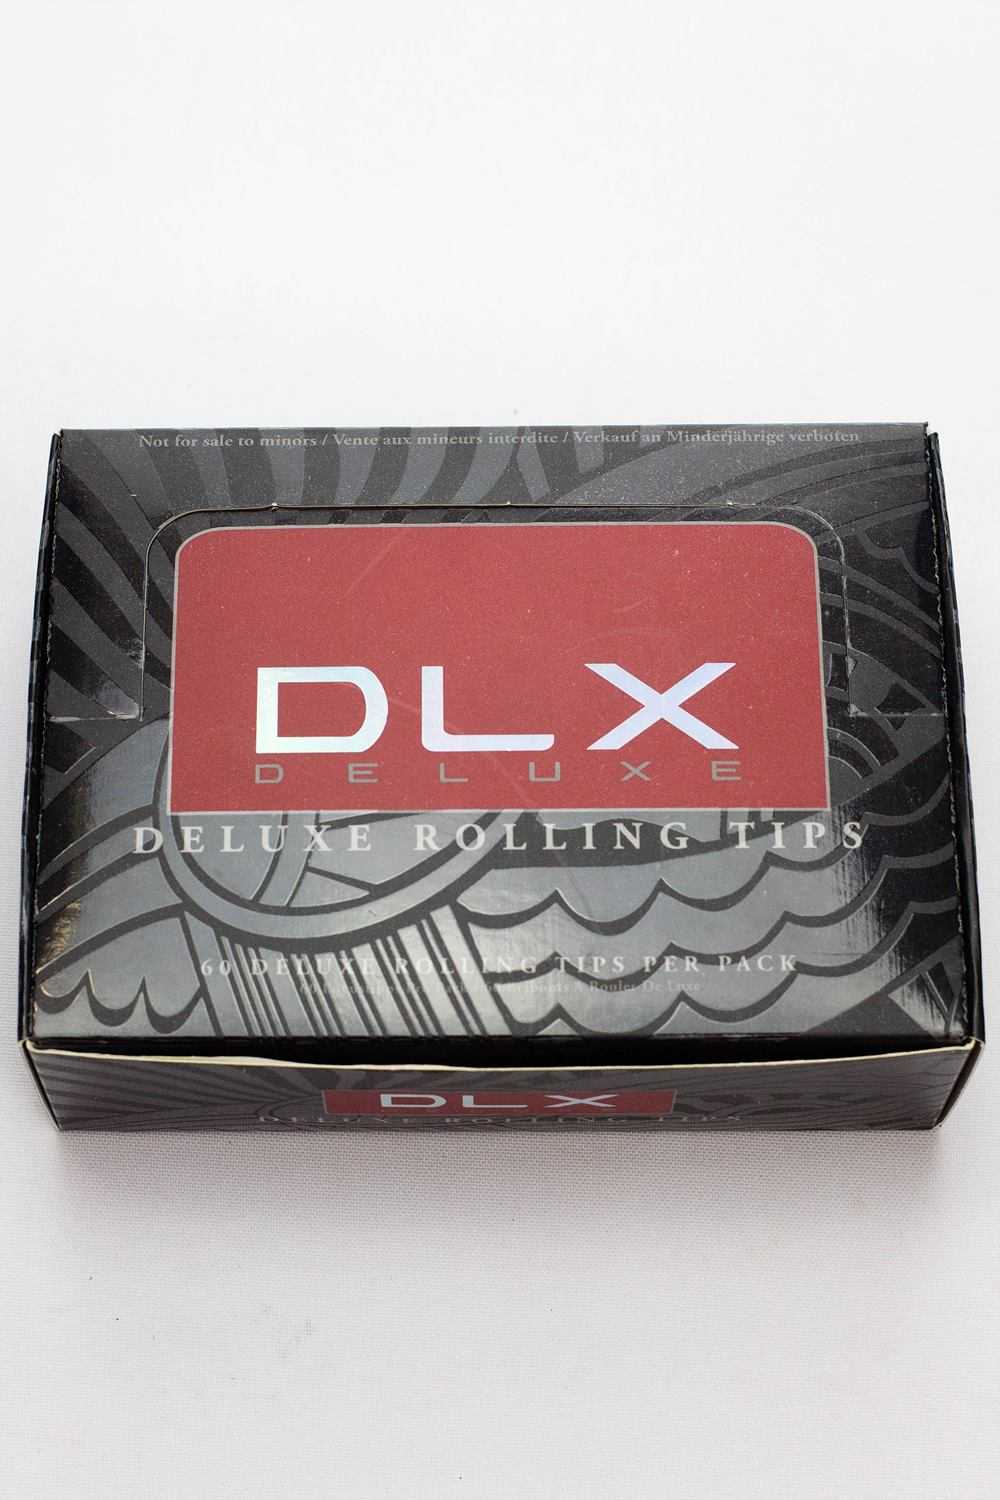 DLX Rolling paper filter tips_1